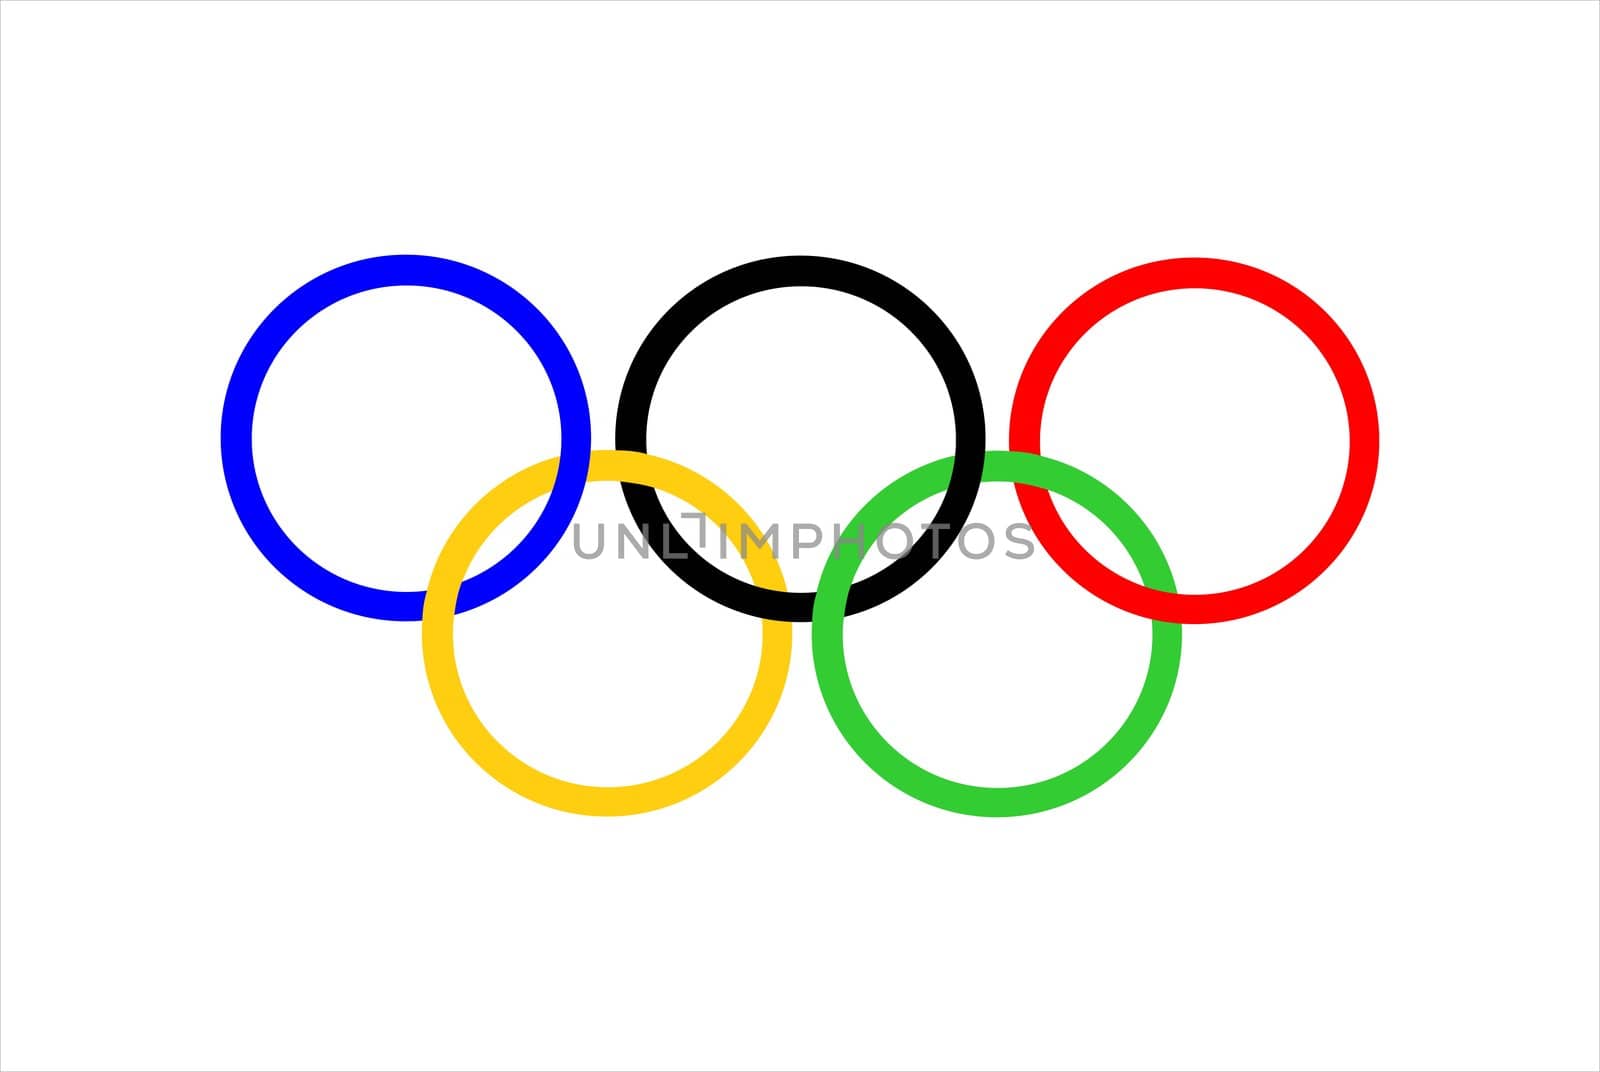 The five interlocking Olympic Rings photographed on a white field